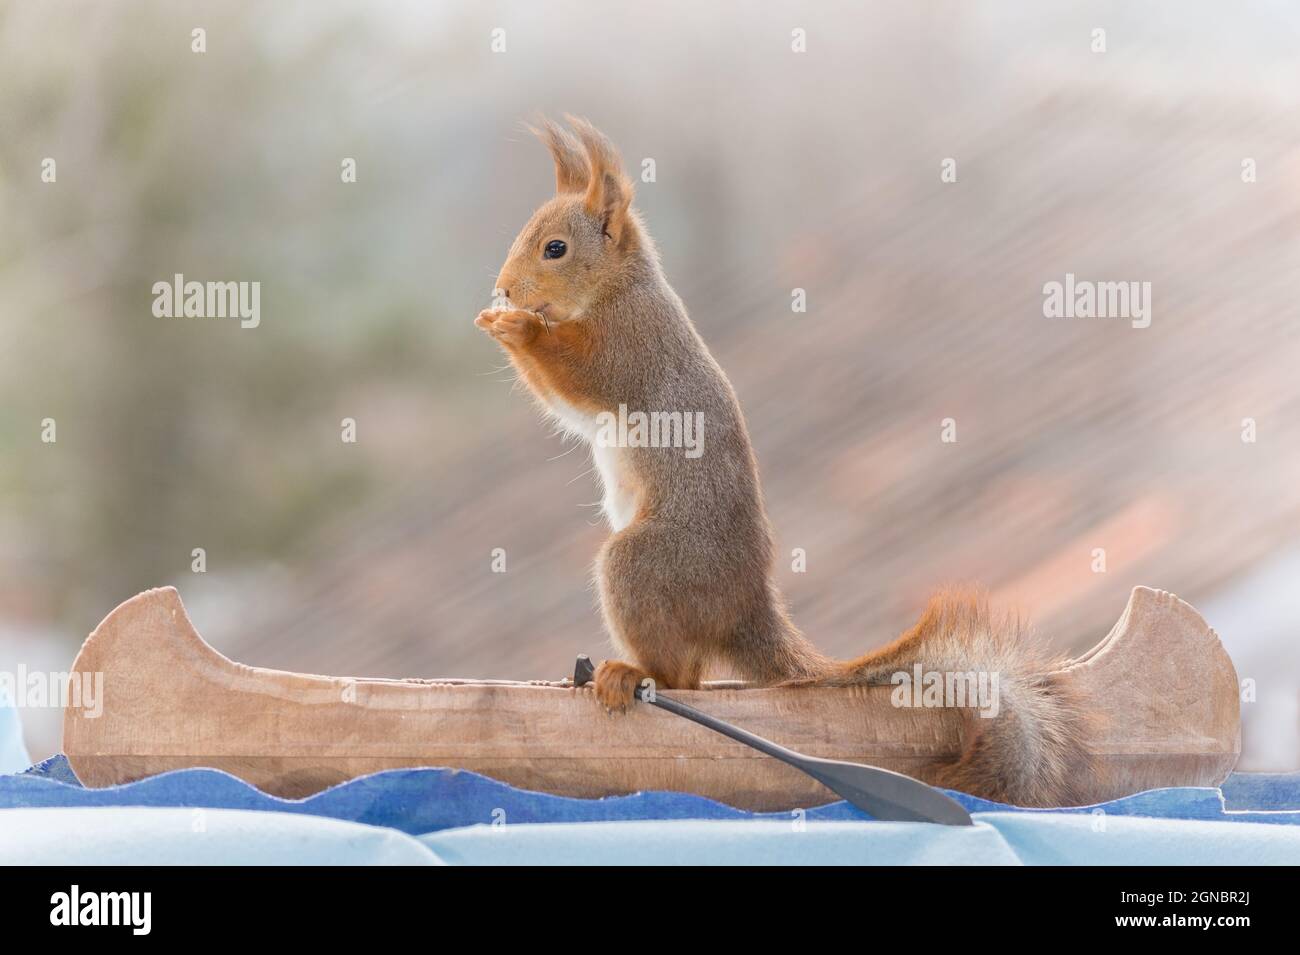 close up of  red squirrel standing  in a canoe with paddles Stock Photo